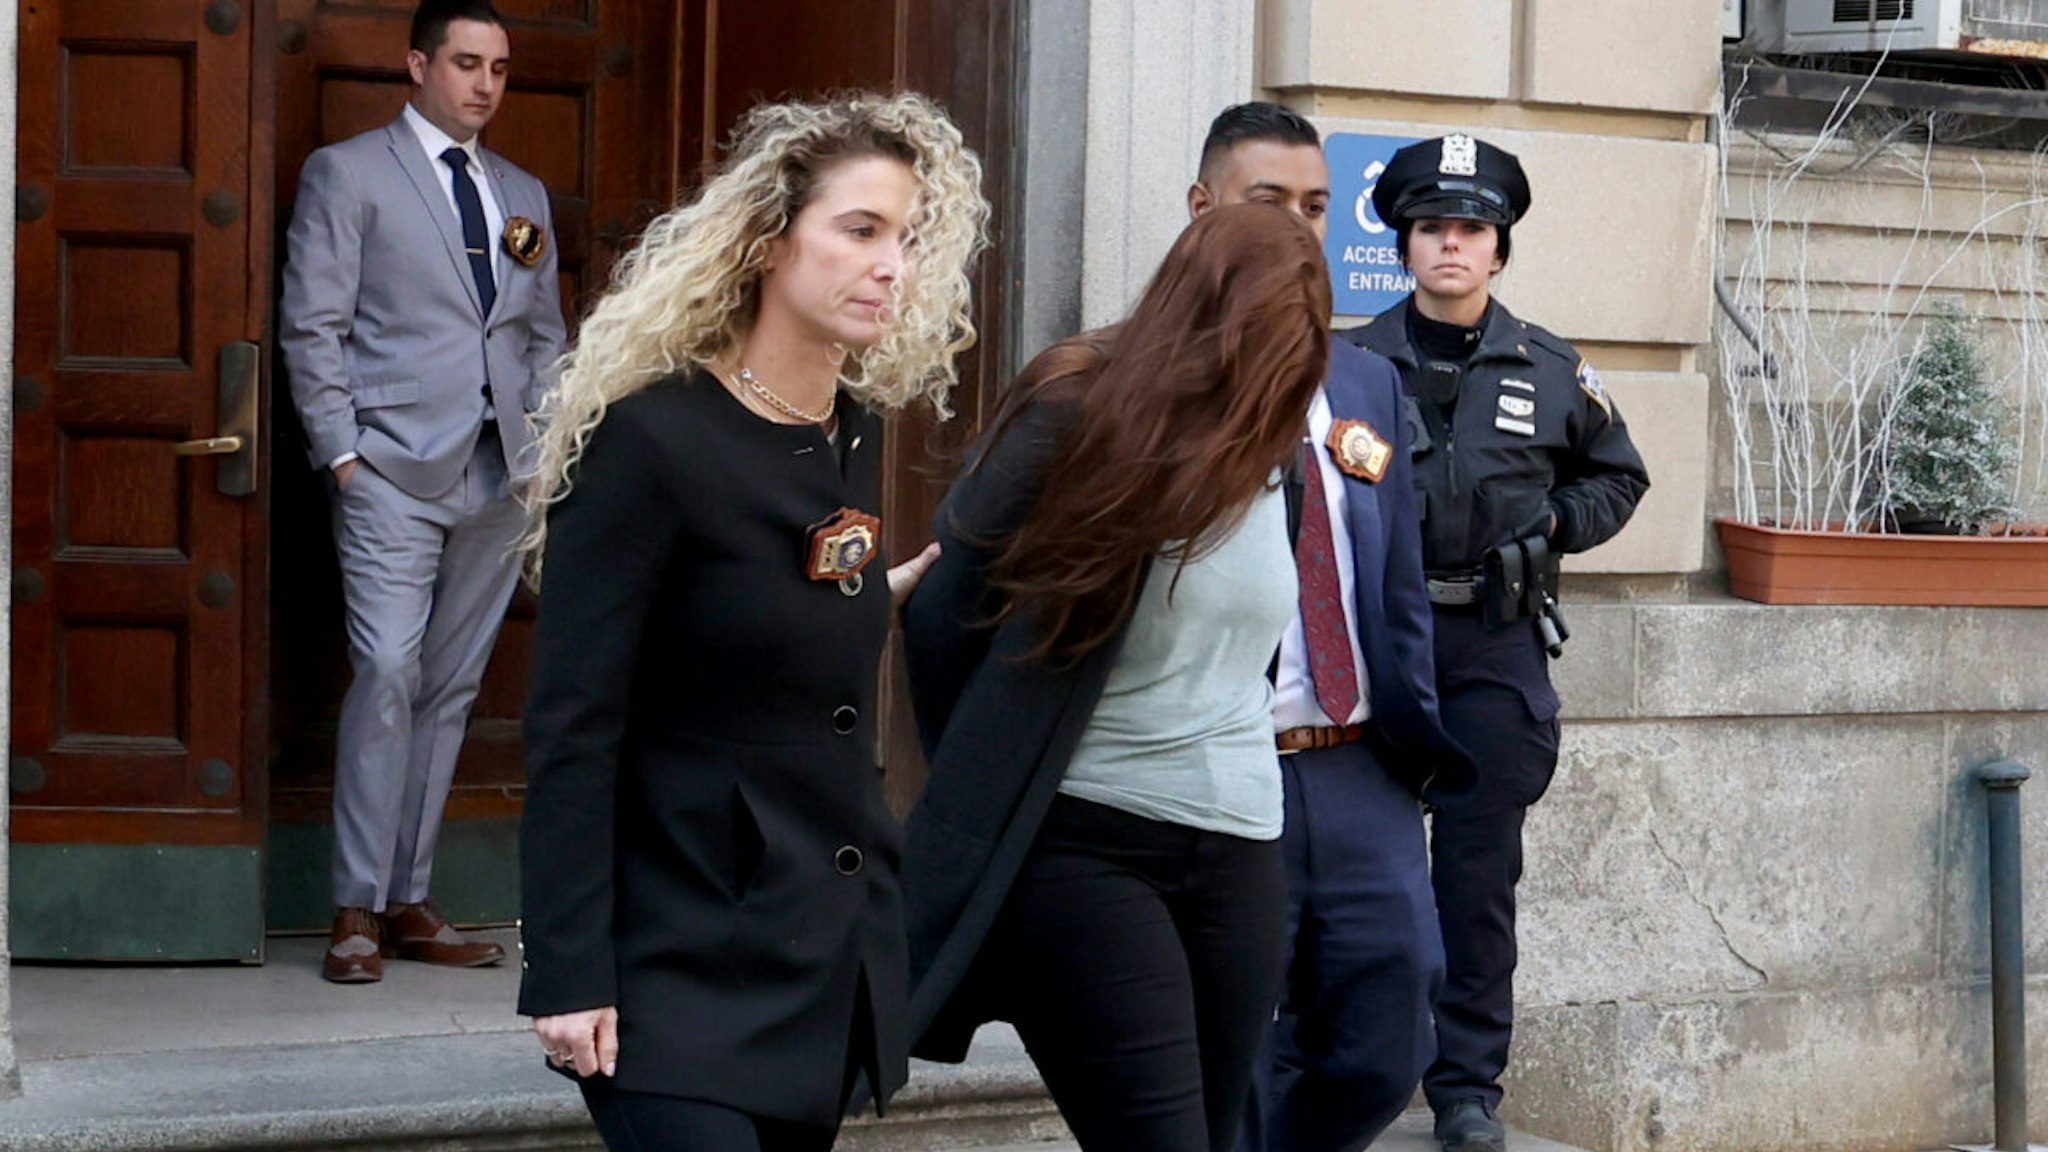 NYPD 10th Precinct Detectives walk 26 years old Lauren Pazienza to face Manslaughter charges for the shoving 87-year-old Lauren Maker Gustern